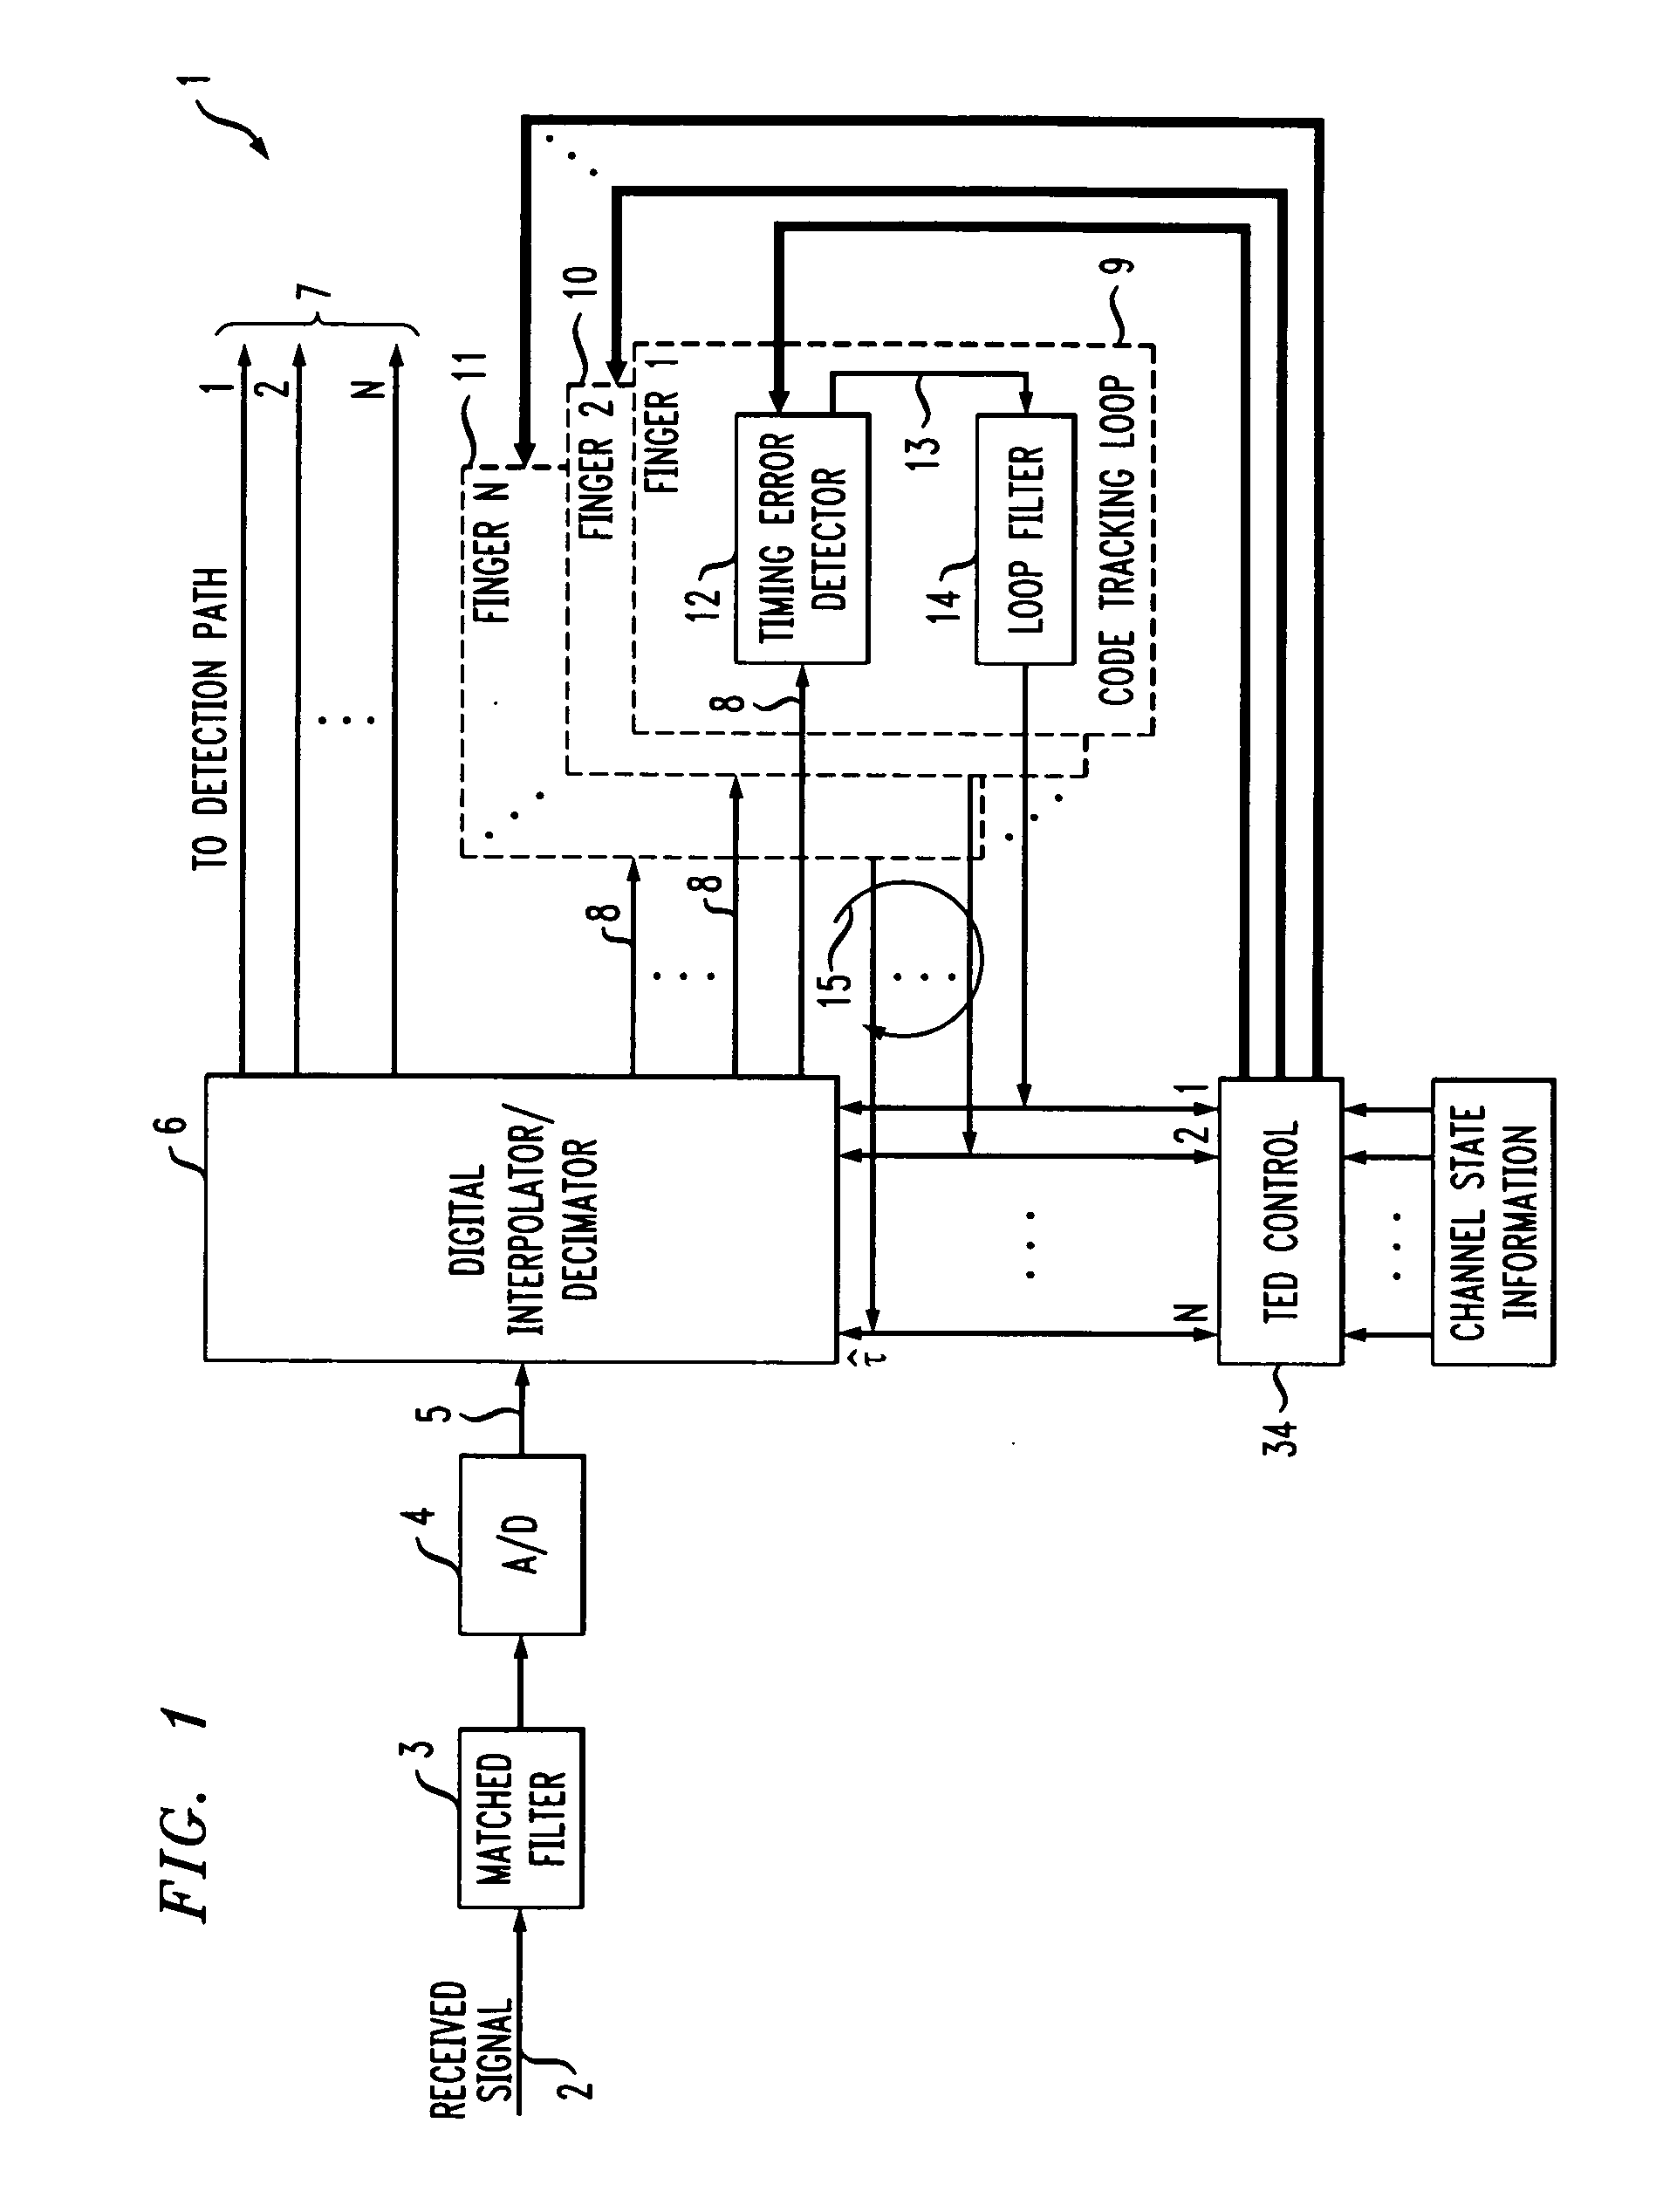 Adaptive code-tracking receiver for direct-sequence code-division multiple access (CDMA) communications over multipath fading channels and method for signal processing in a rake receiver